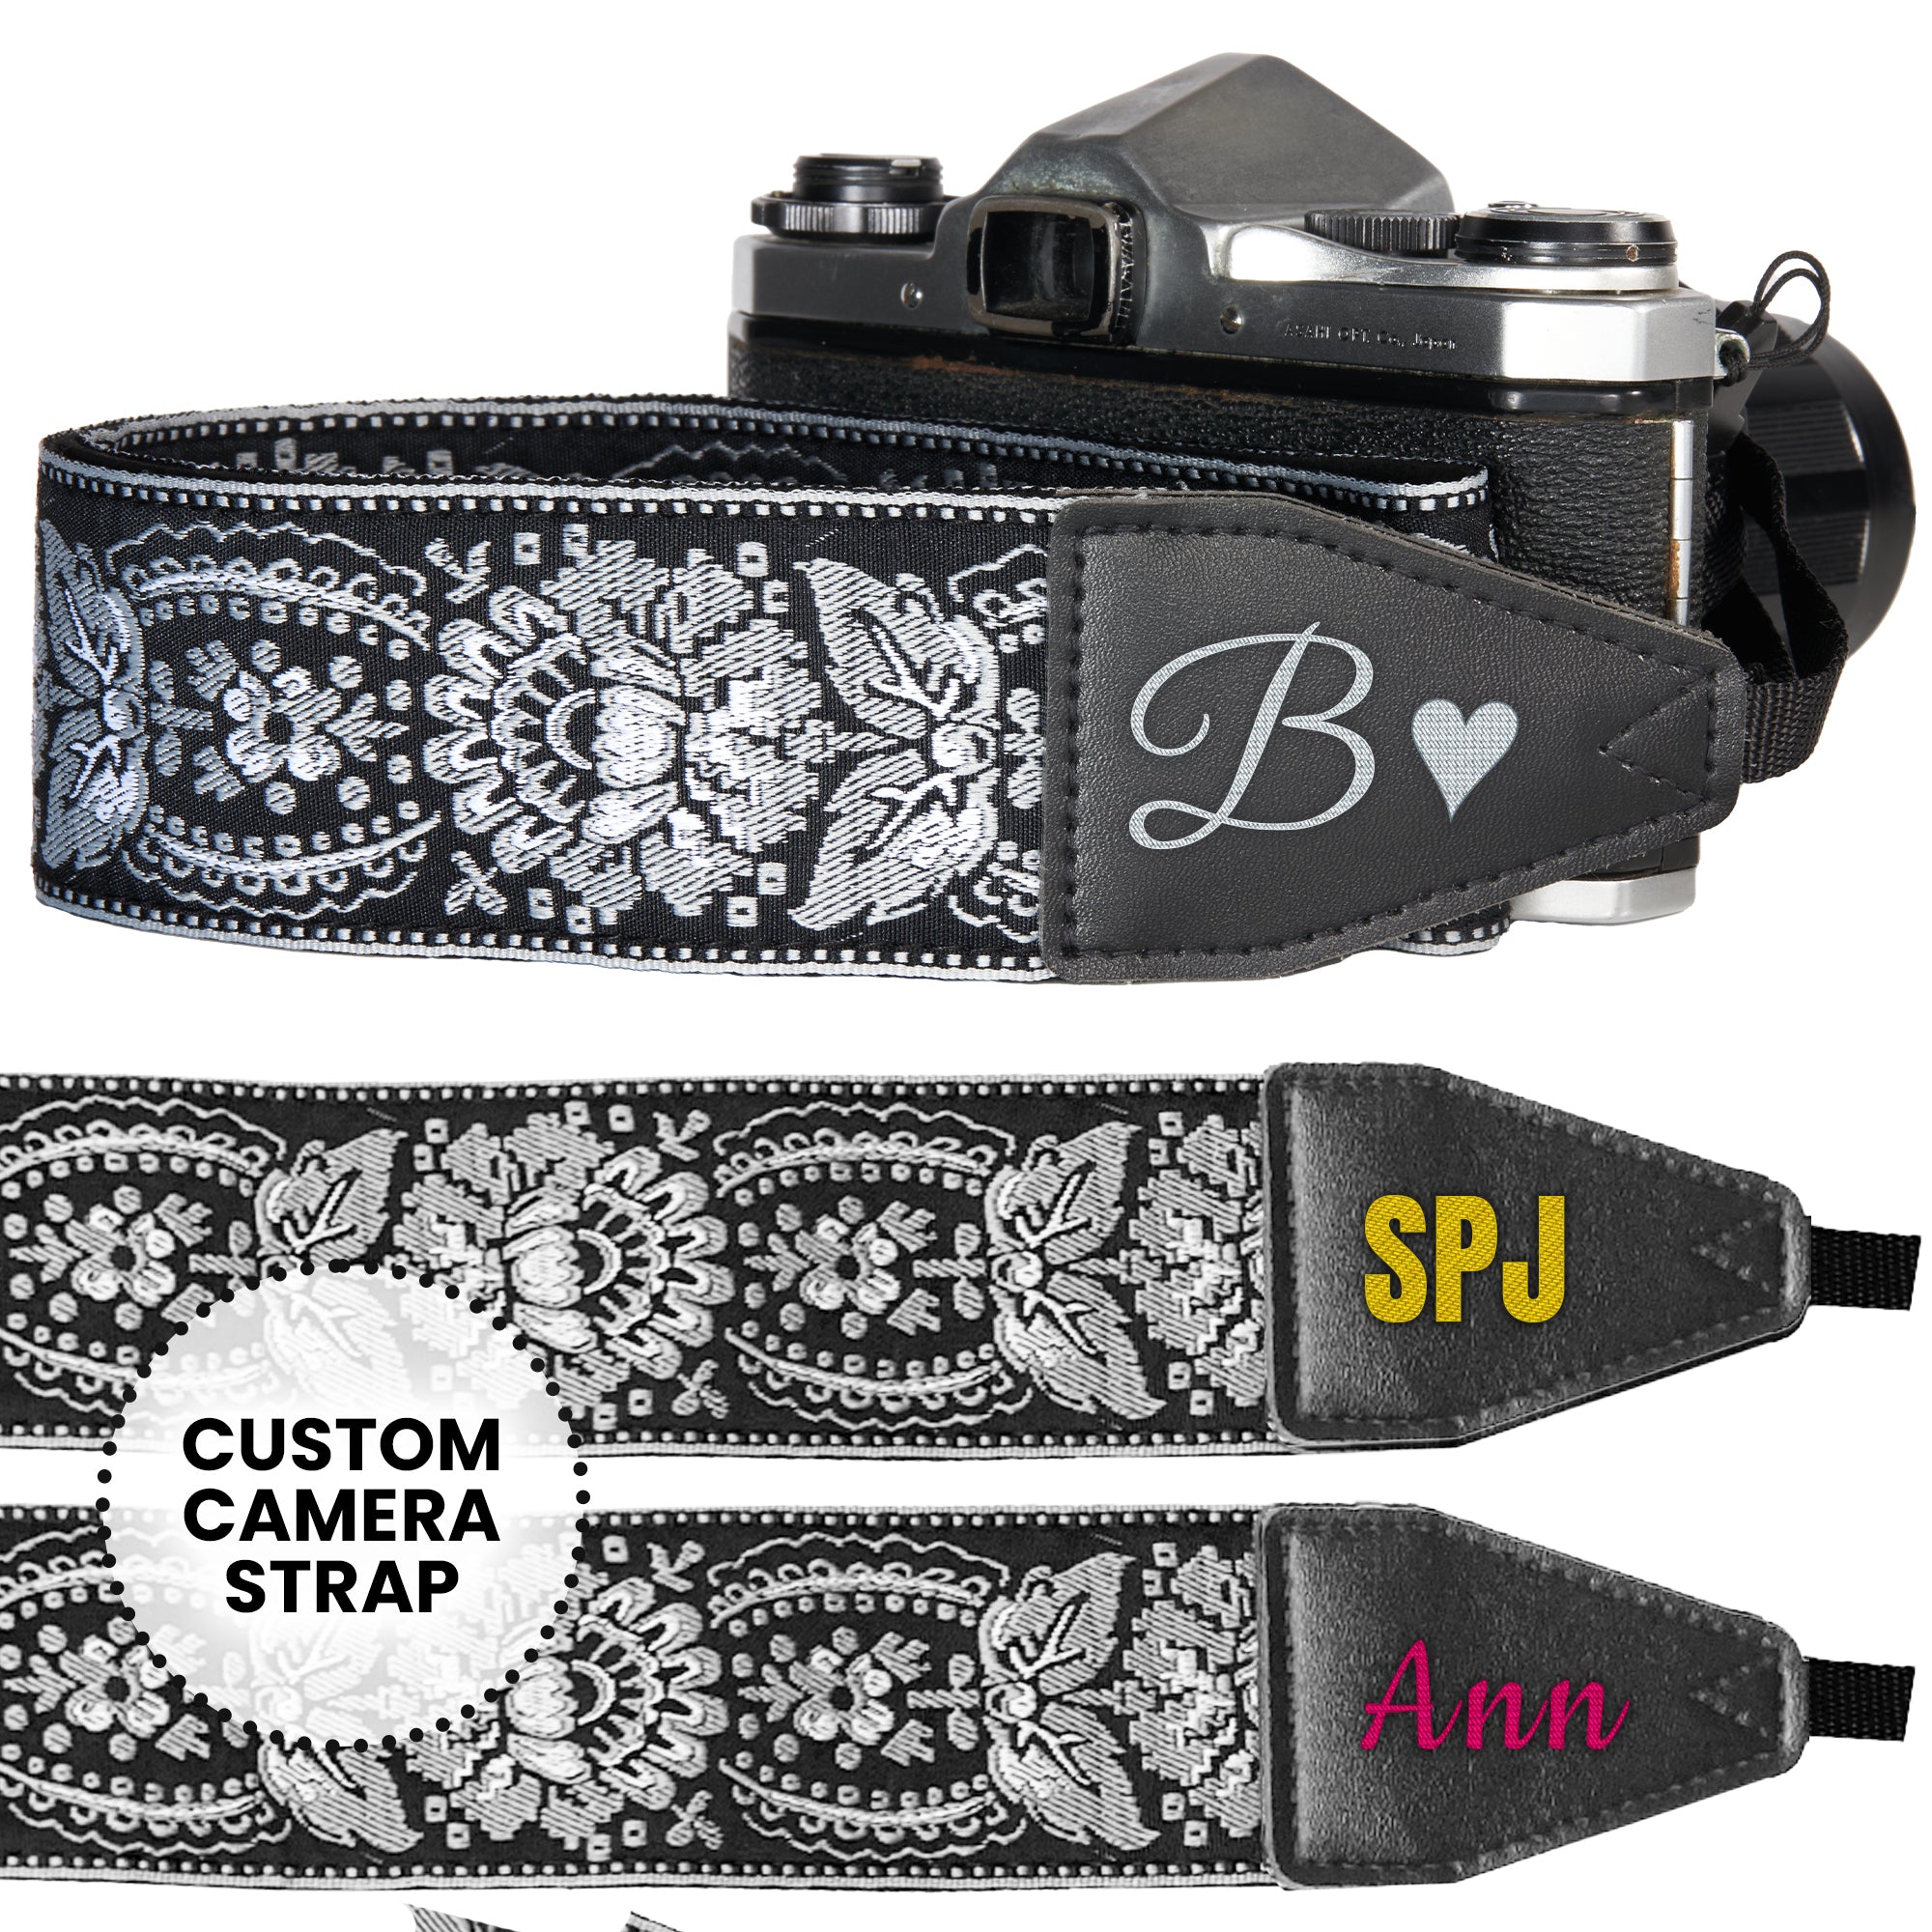 Personalized Camera Strap- Add your text to make your own unique camera strap. Best custom gift